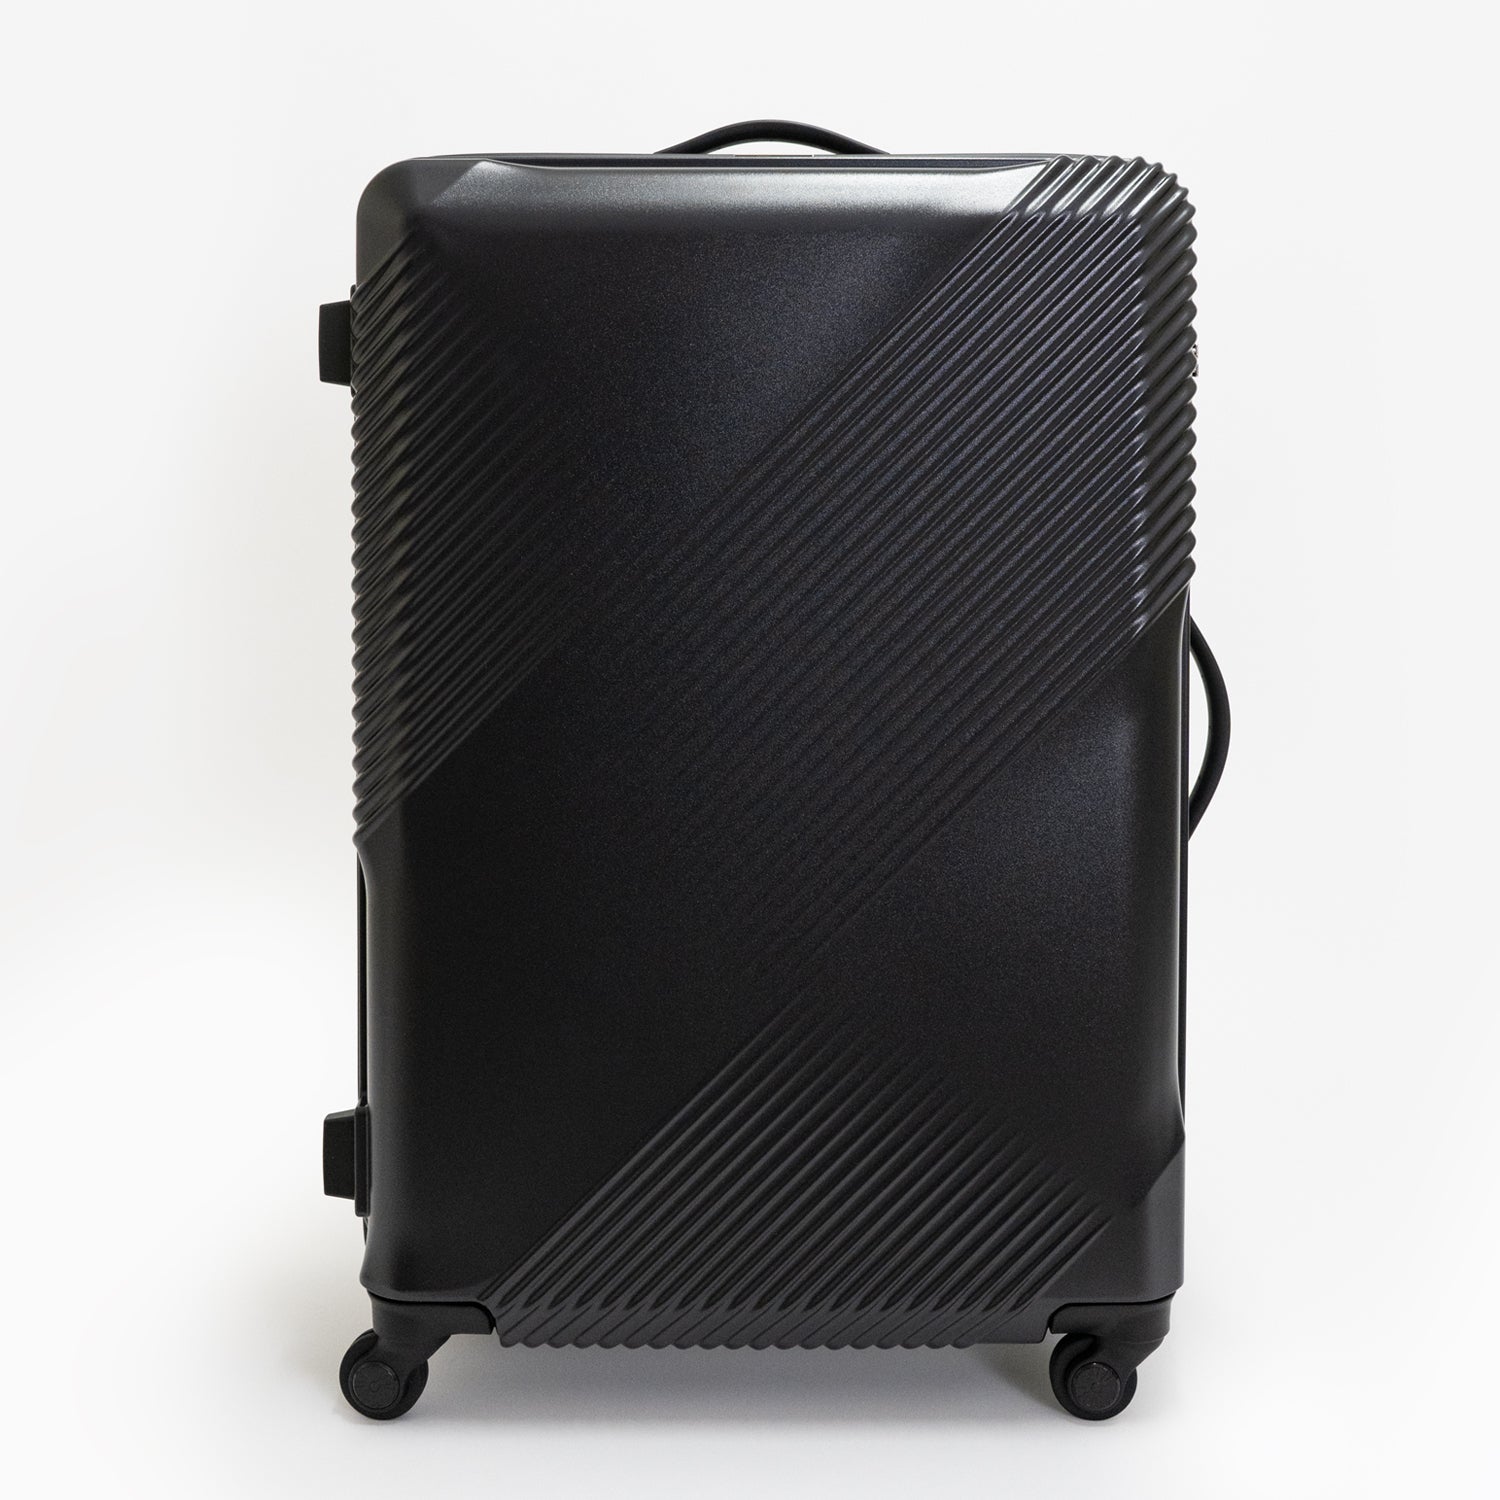 Glide 100%リサイクルシェルスーツケース LARGE_No.5700377 – ACE LUGGAGE